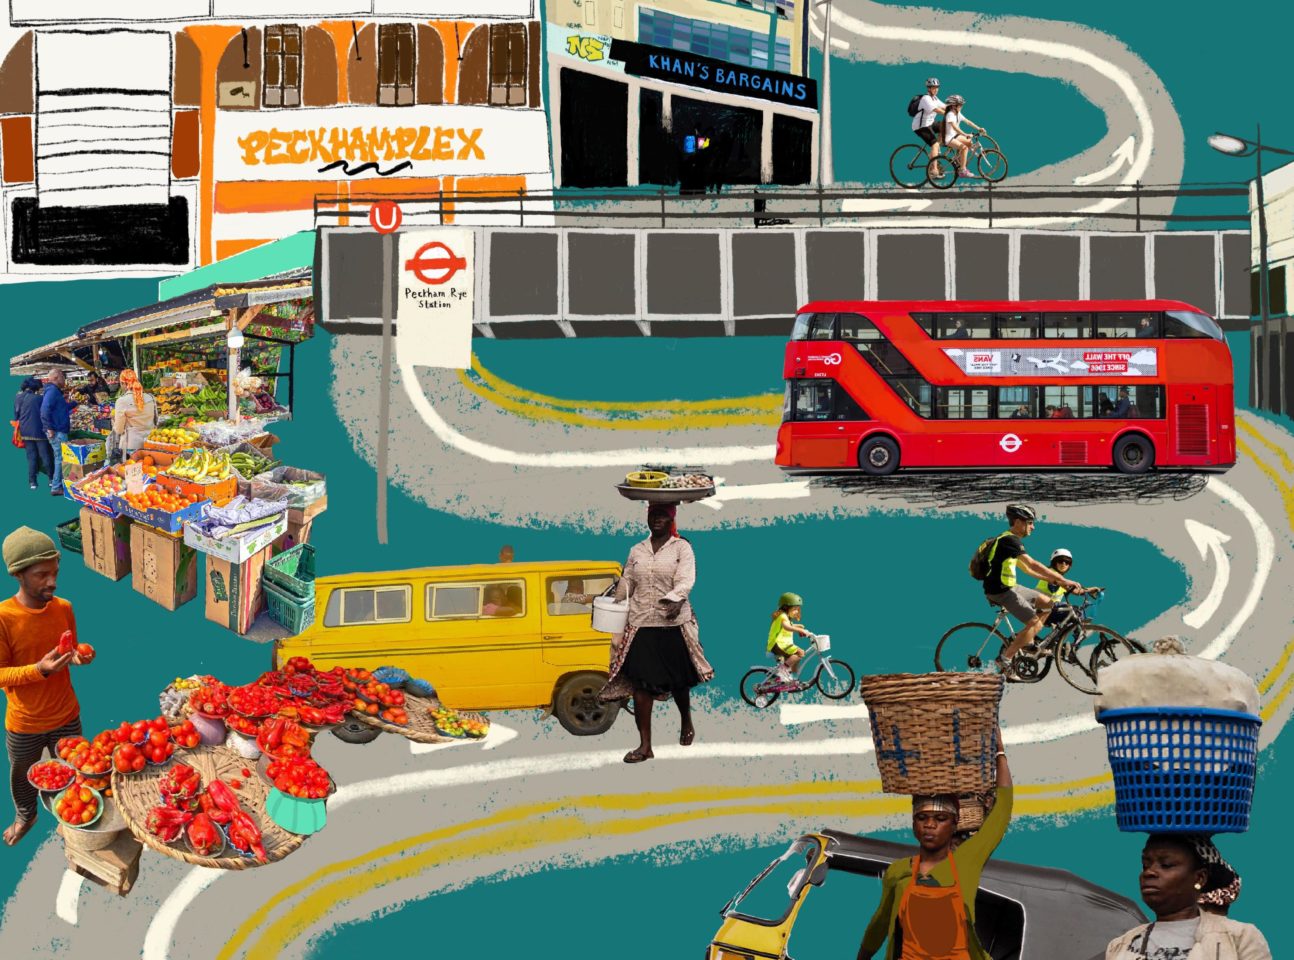 Collage of buses, shop front, illustrations, market stalls and people